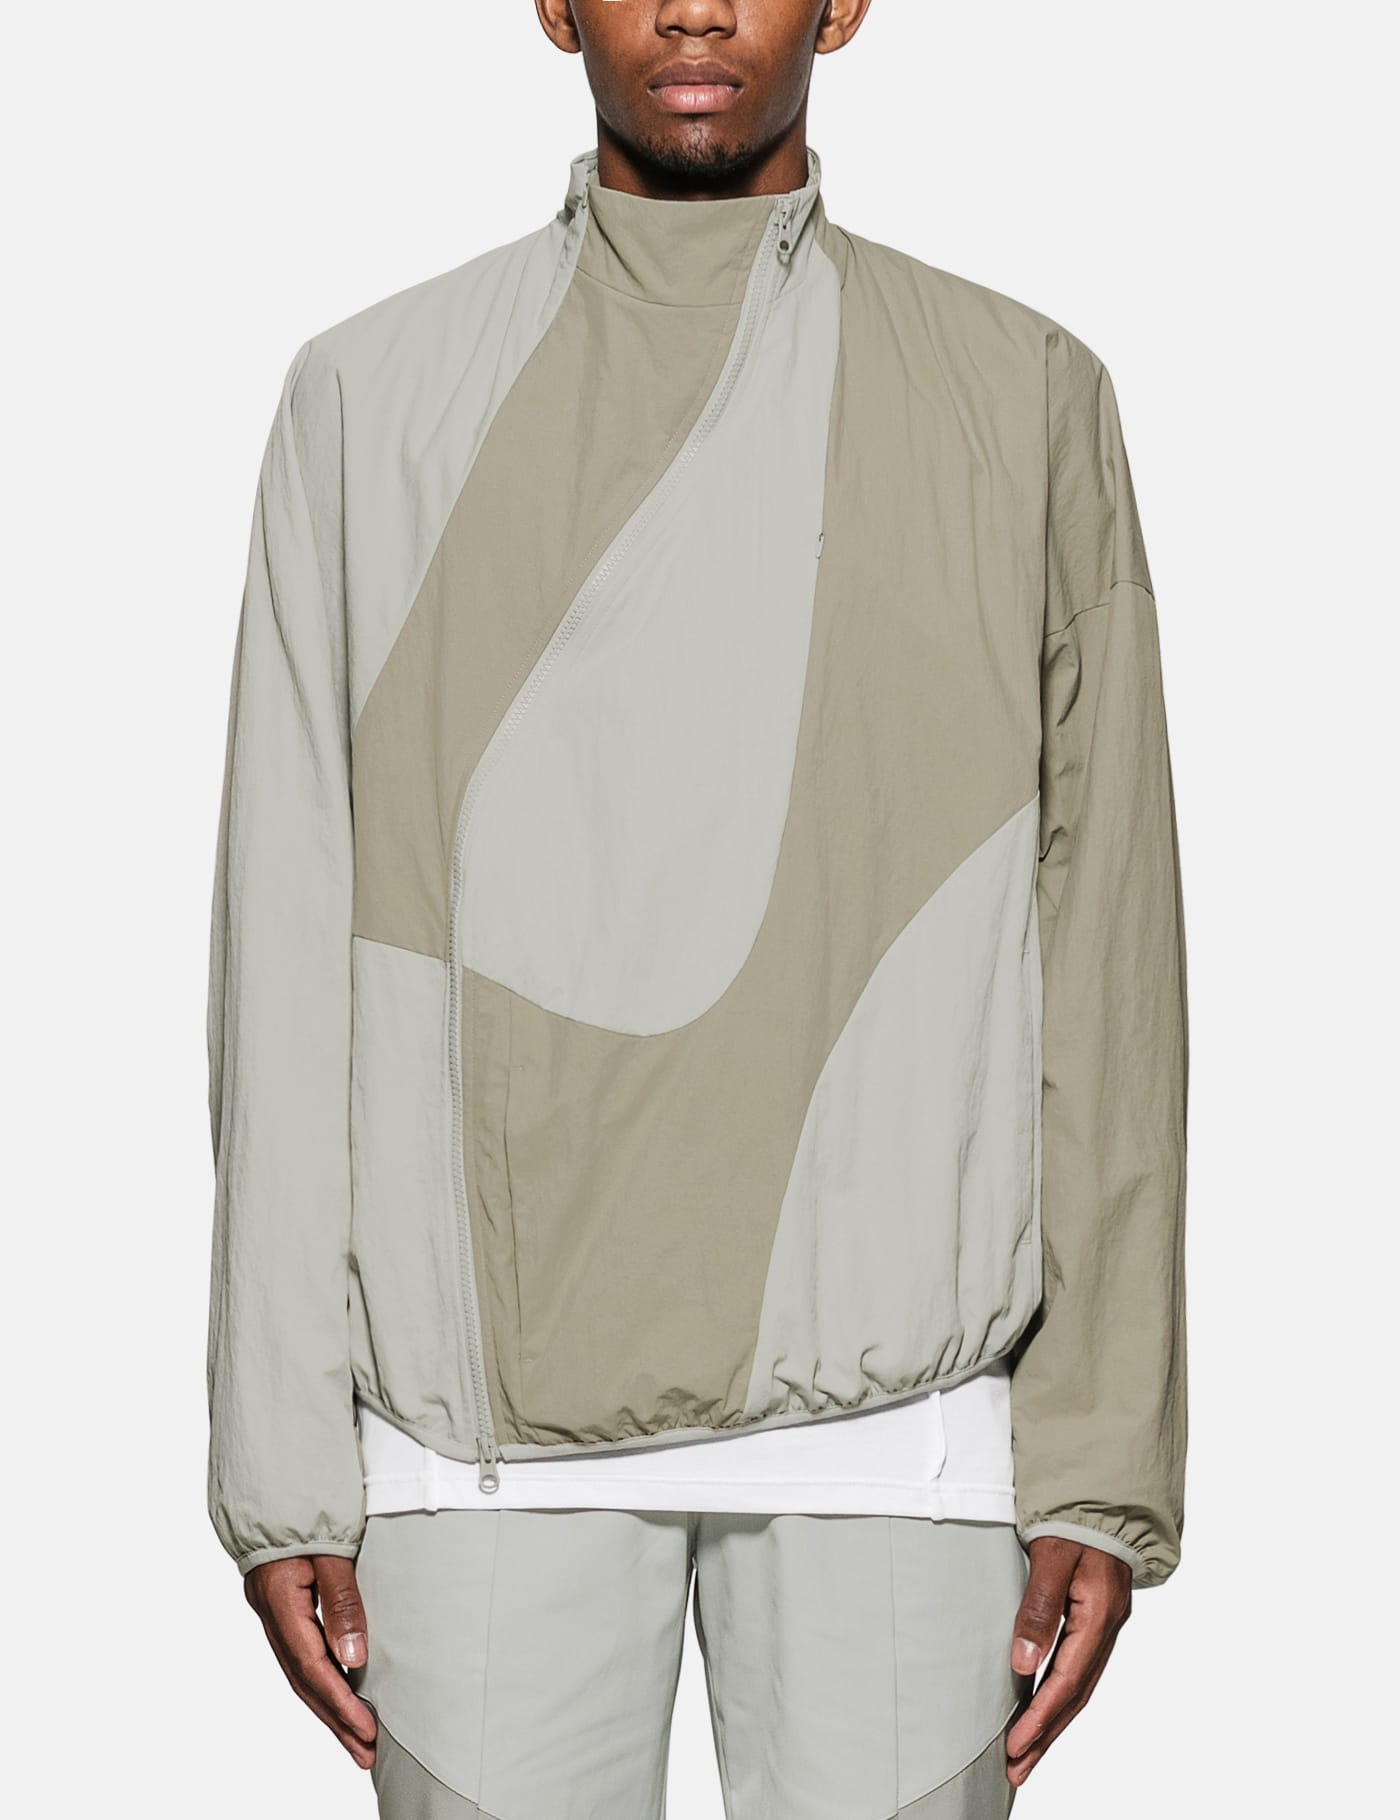 POST ARCHIVE FACTION (PAF) - 3.1 Technical Jacket Right | HBX 